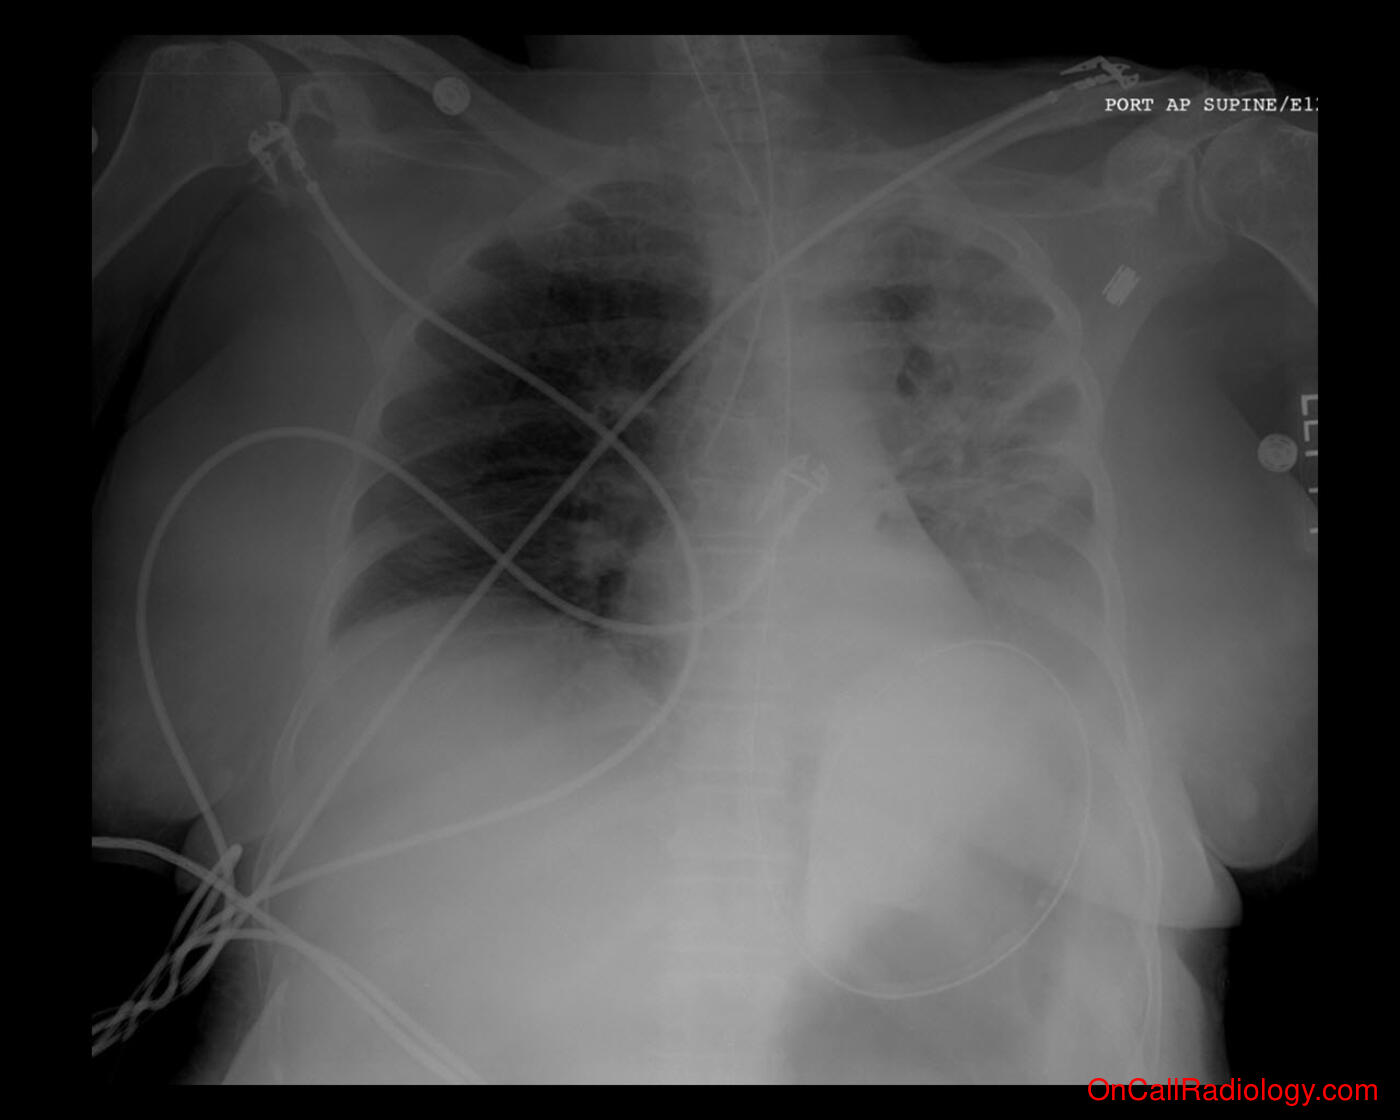 Tube and line misplacement (ET tube misplacement  - Plain film, Radiograph)